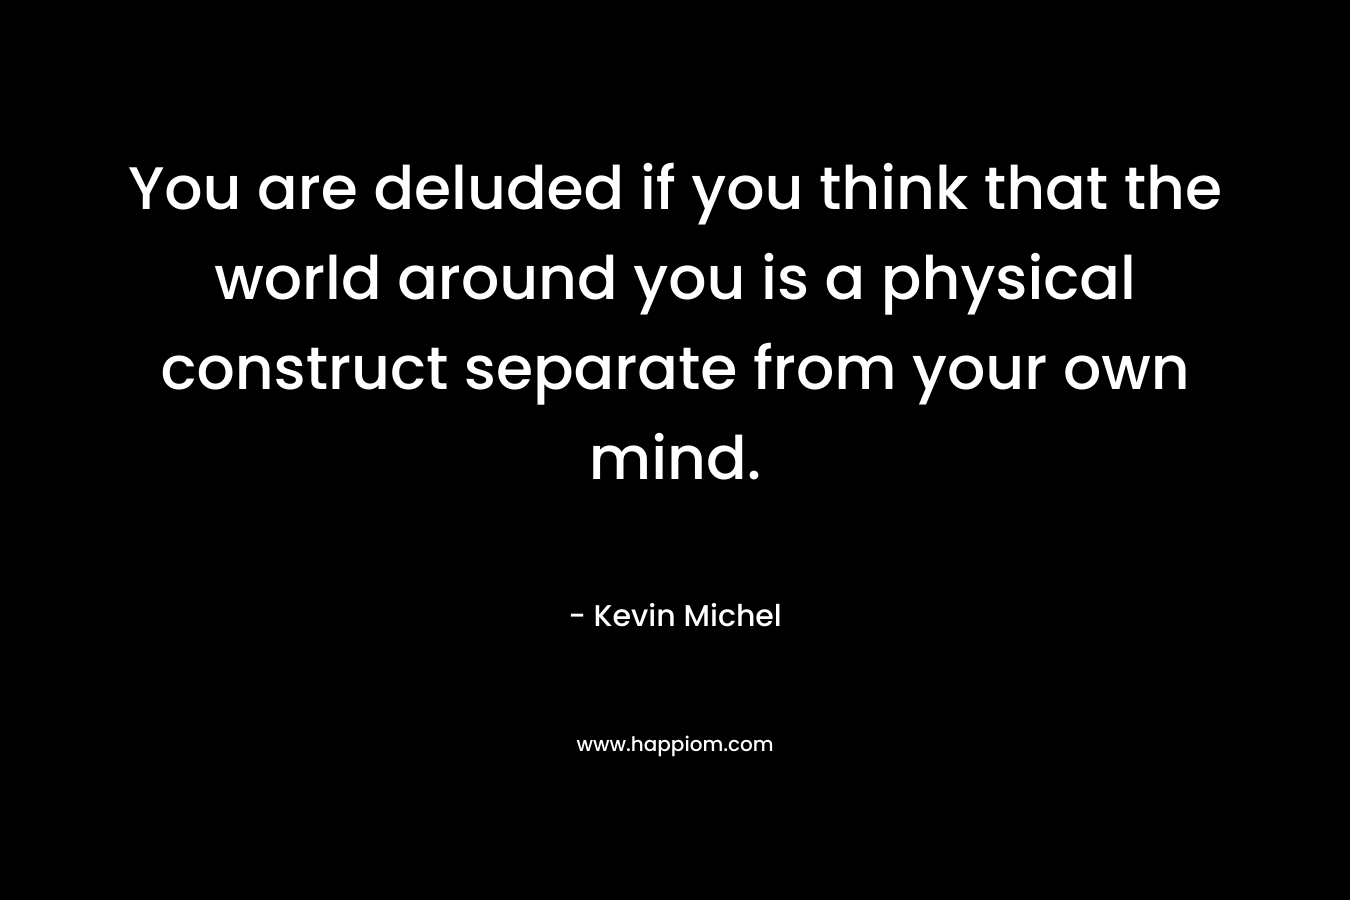 You are deluded if you think that the world around you is a physical construct separate from your own mind.